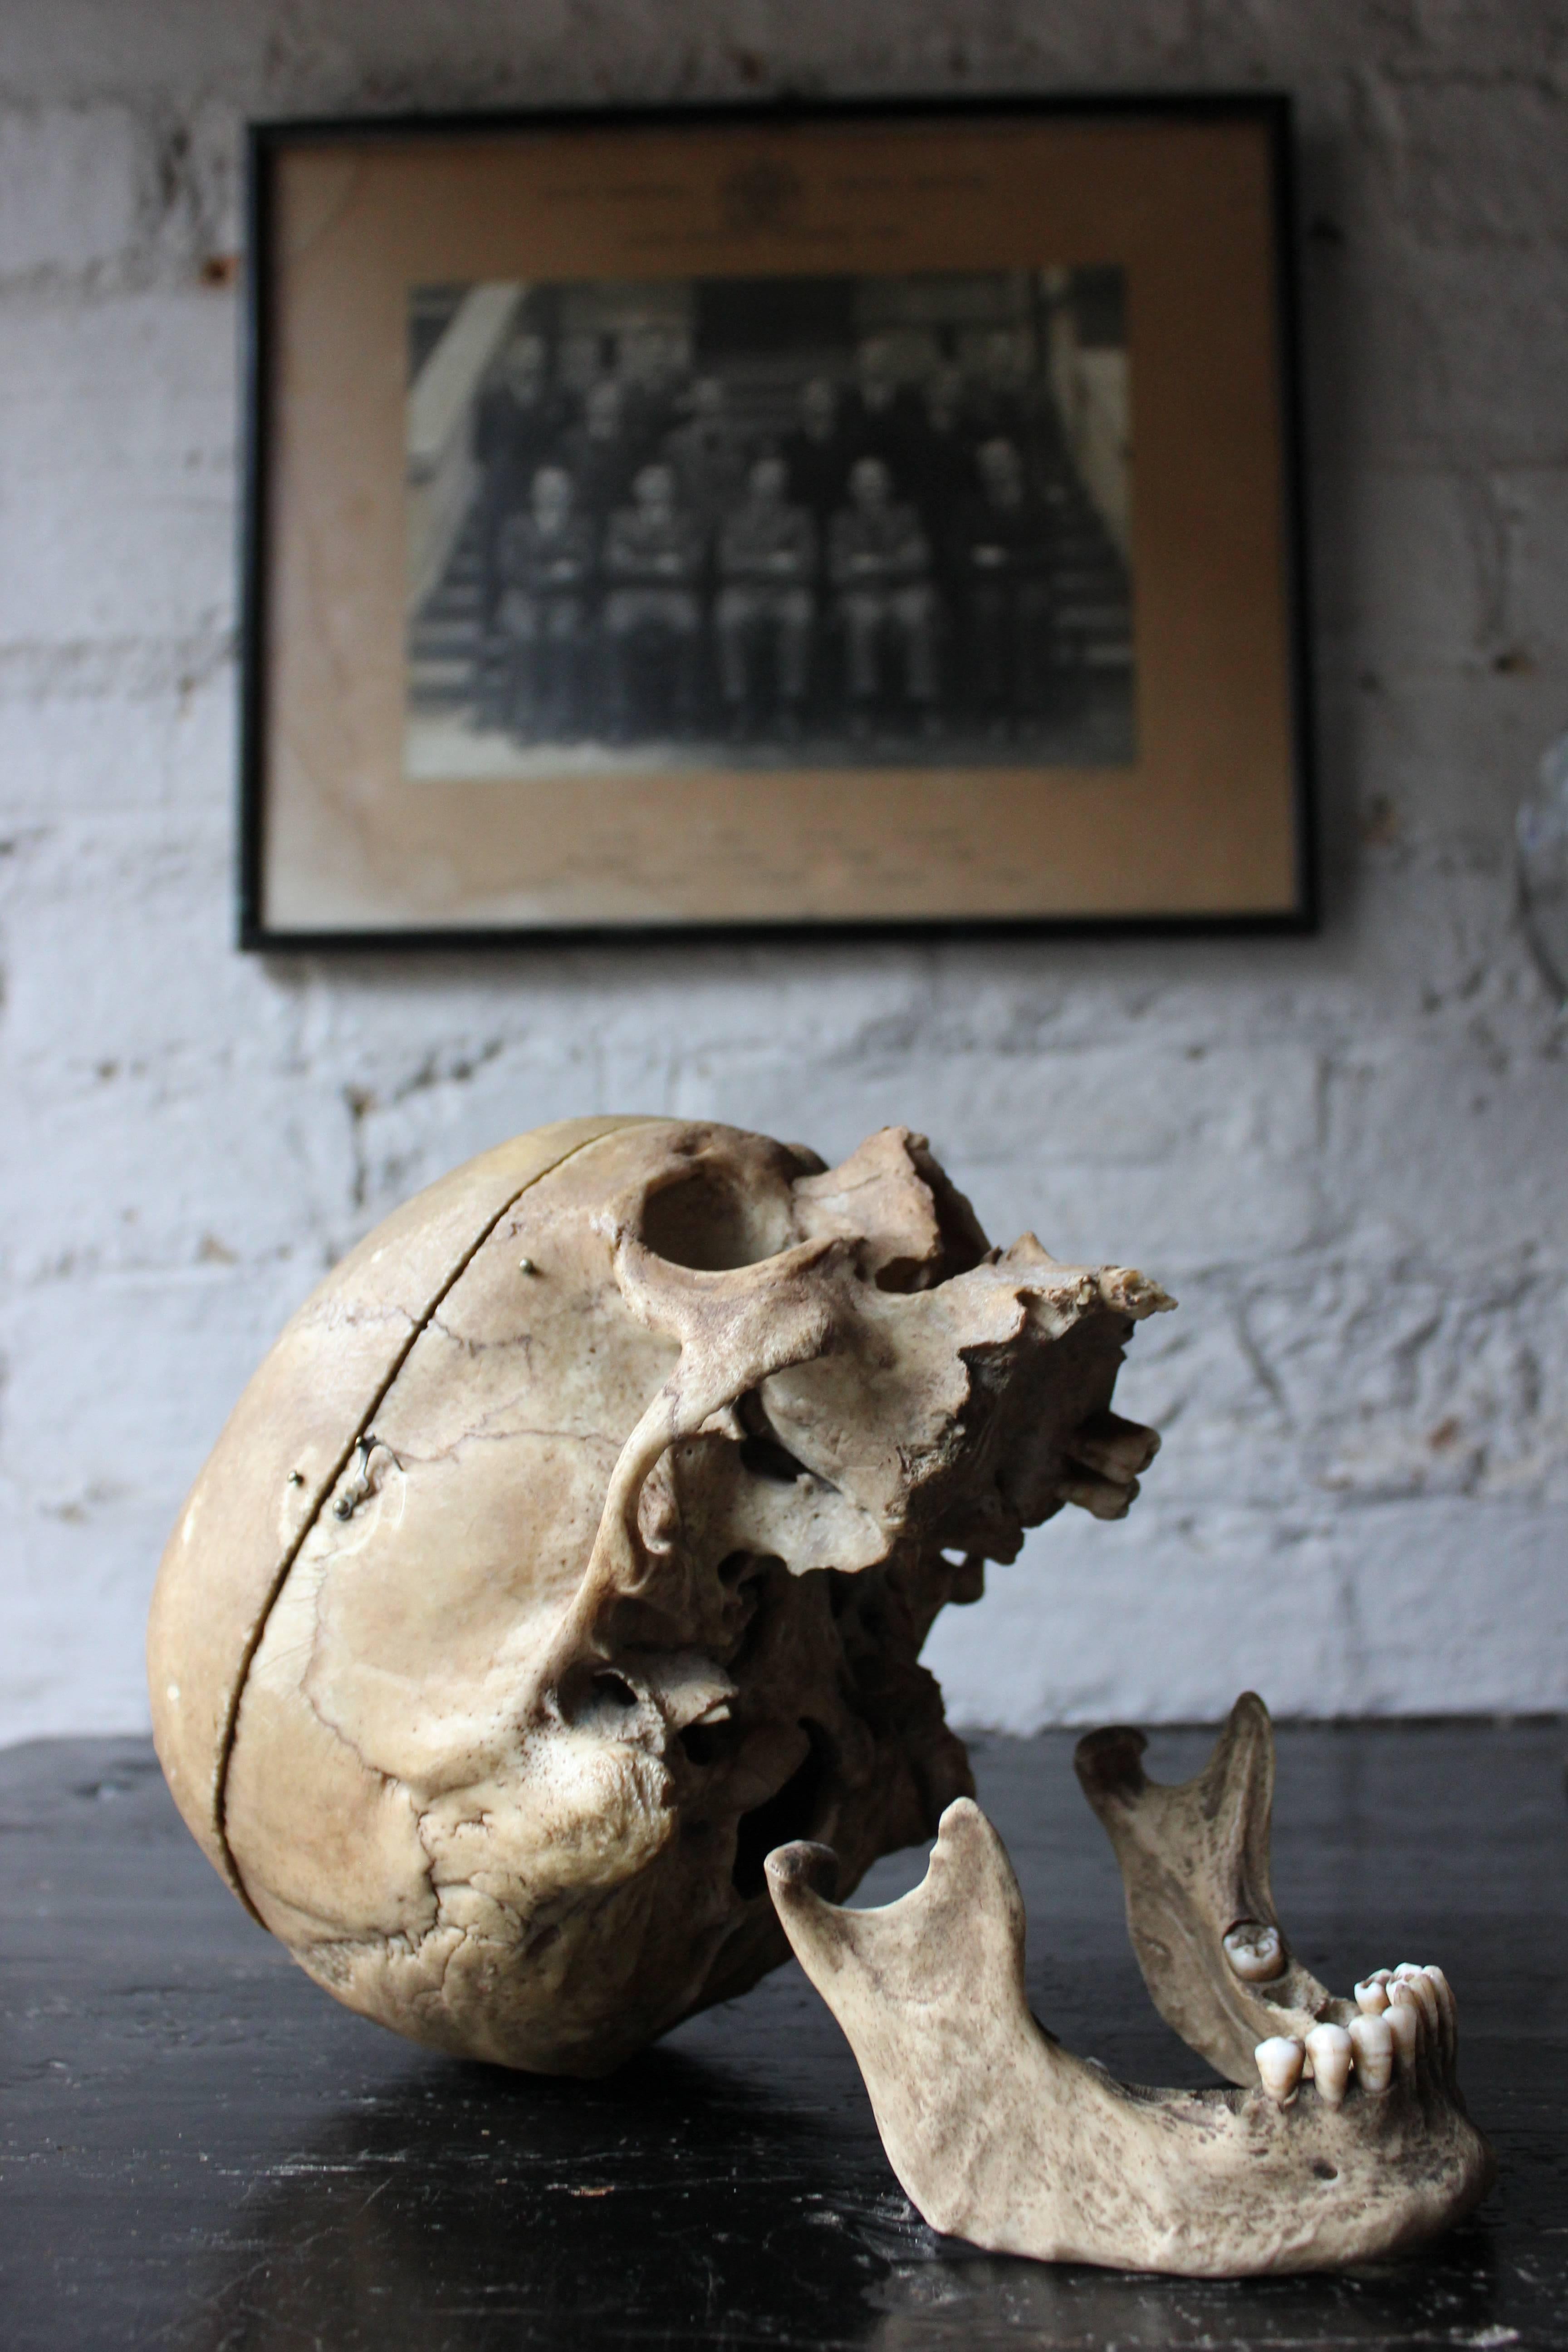 19th Century Early 20thc Human Skull for Odontology and Medical Study from Guy's Hospital